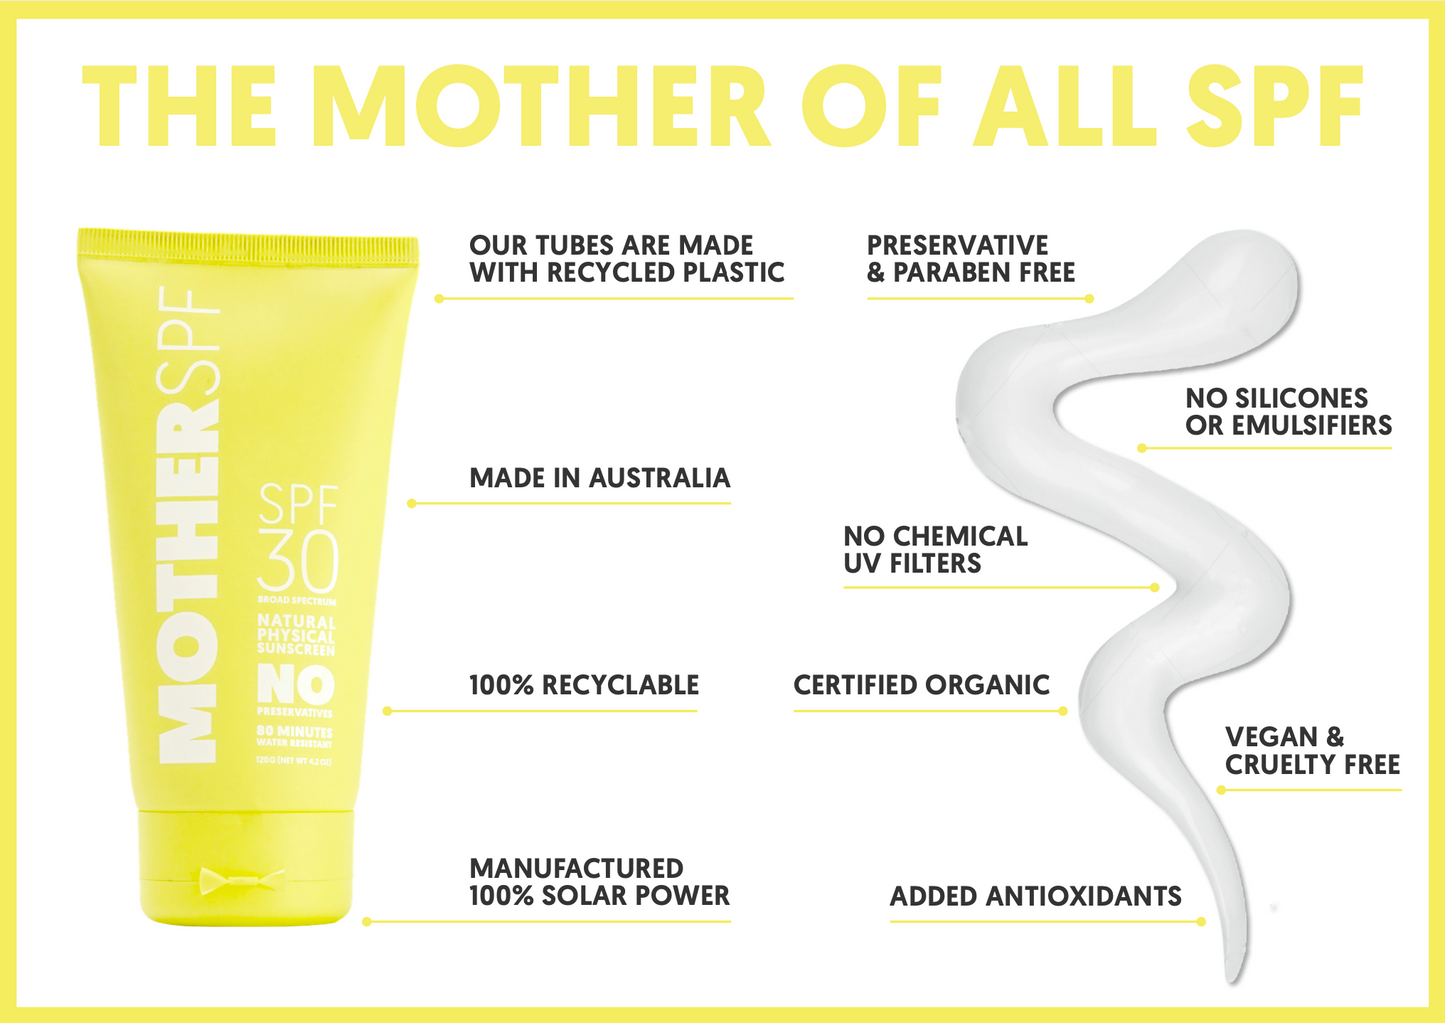 MOTHER SPF